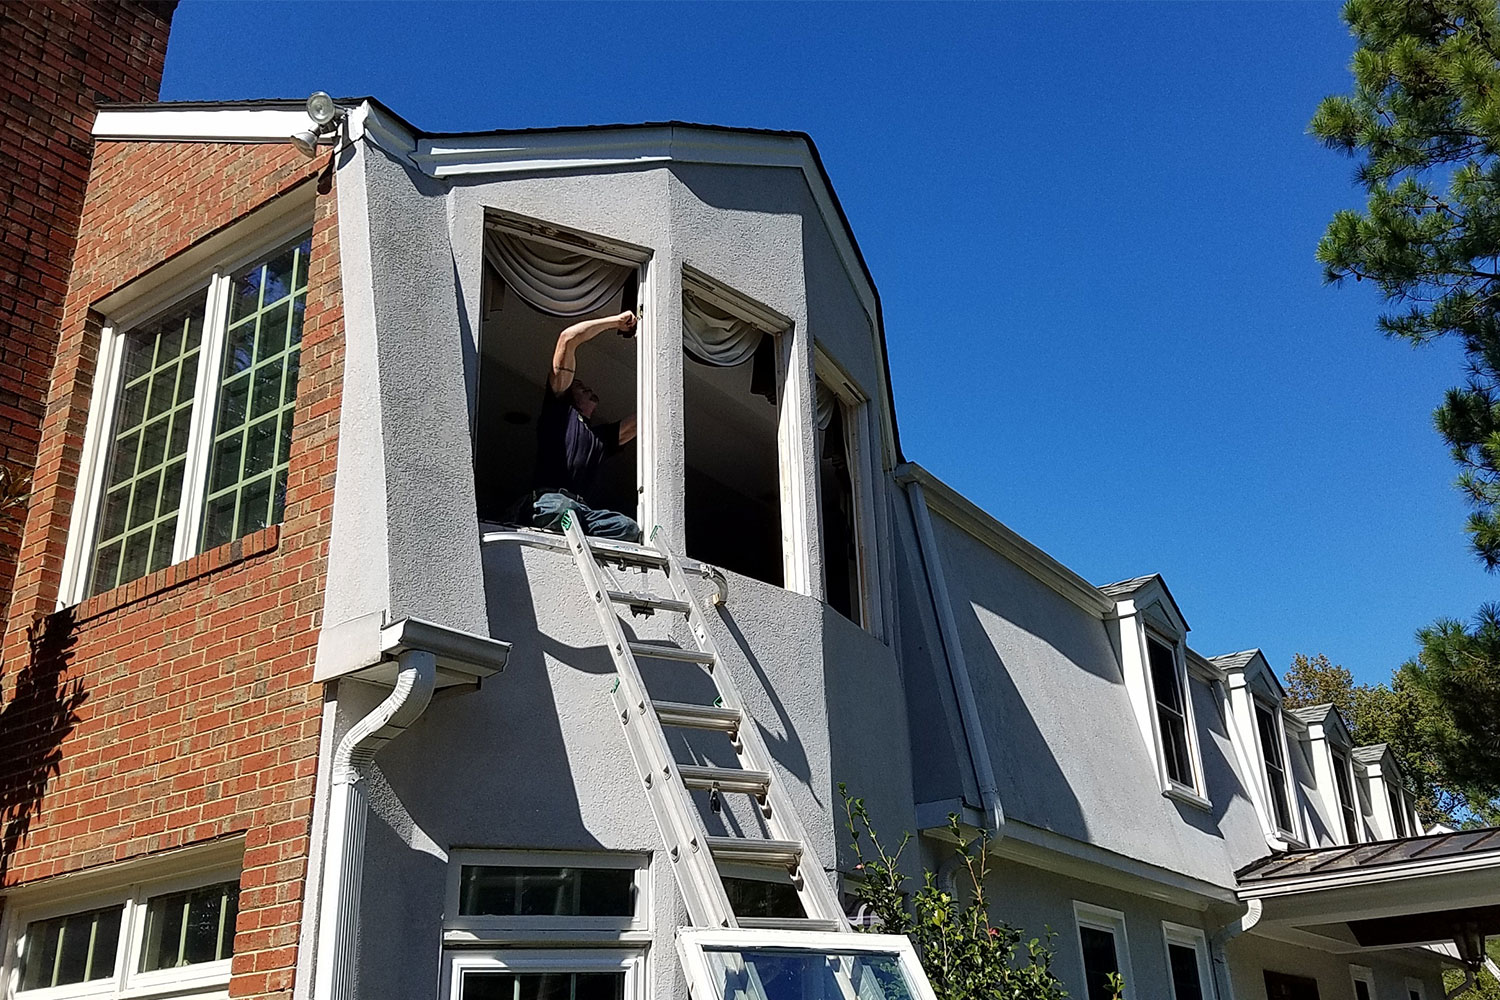 A man working on the windows of a gray house